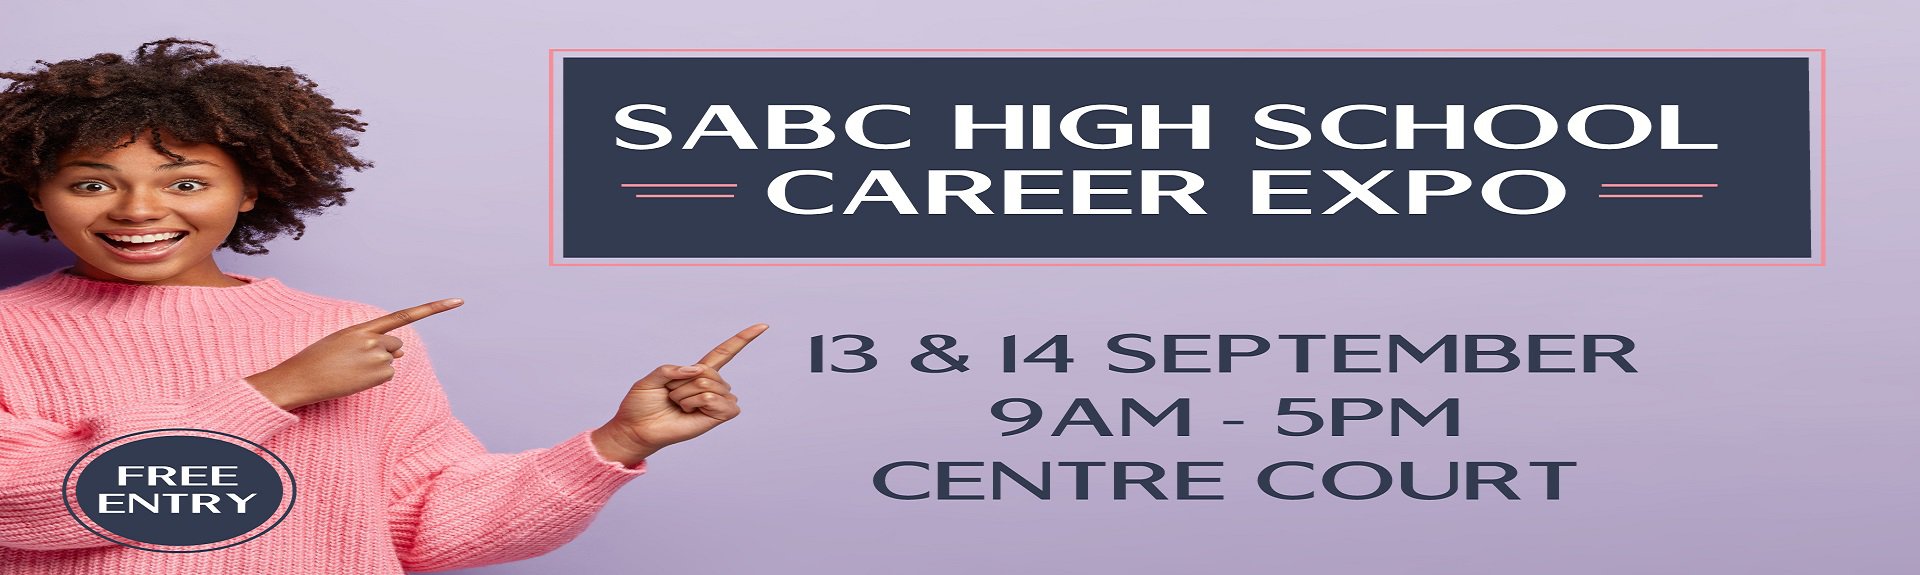 Career Expo at Capegate Shopping Centre